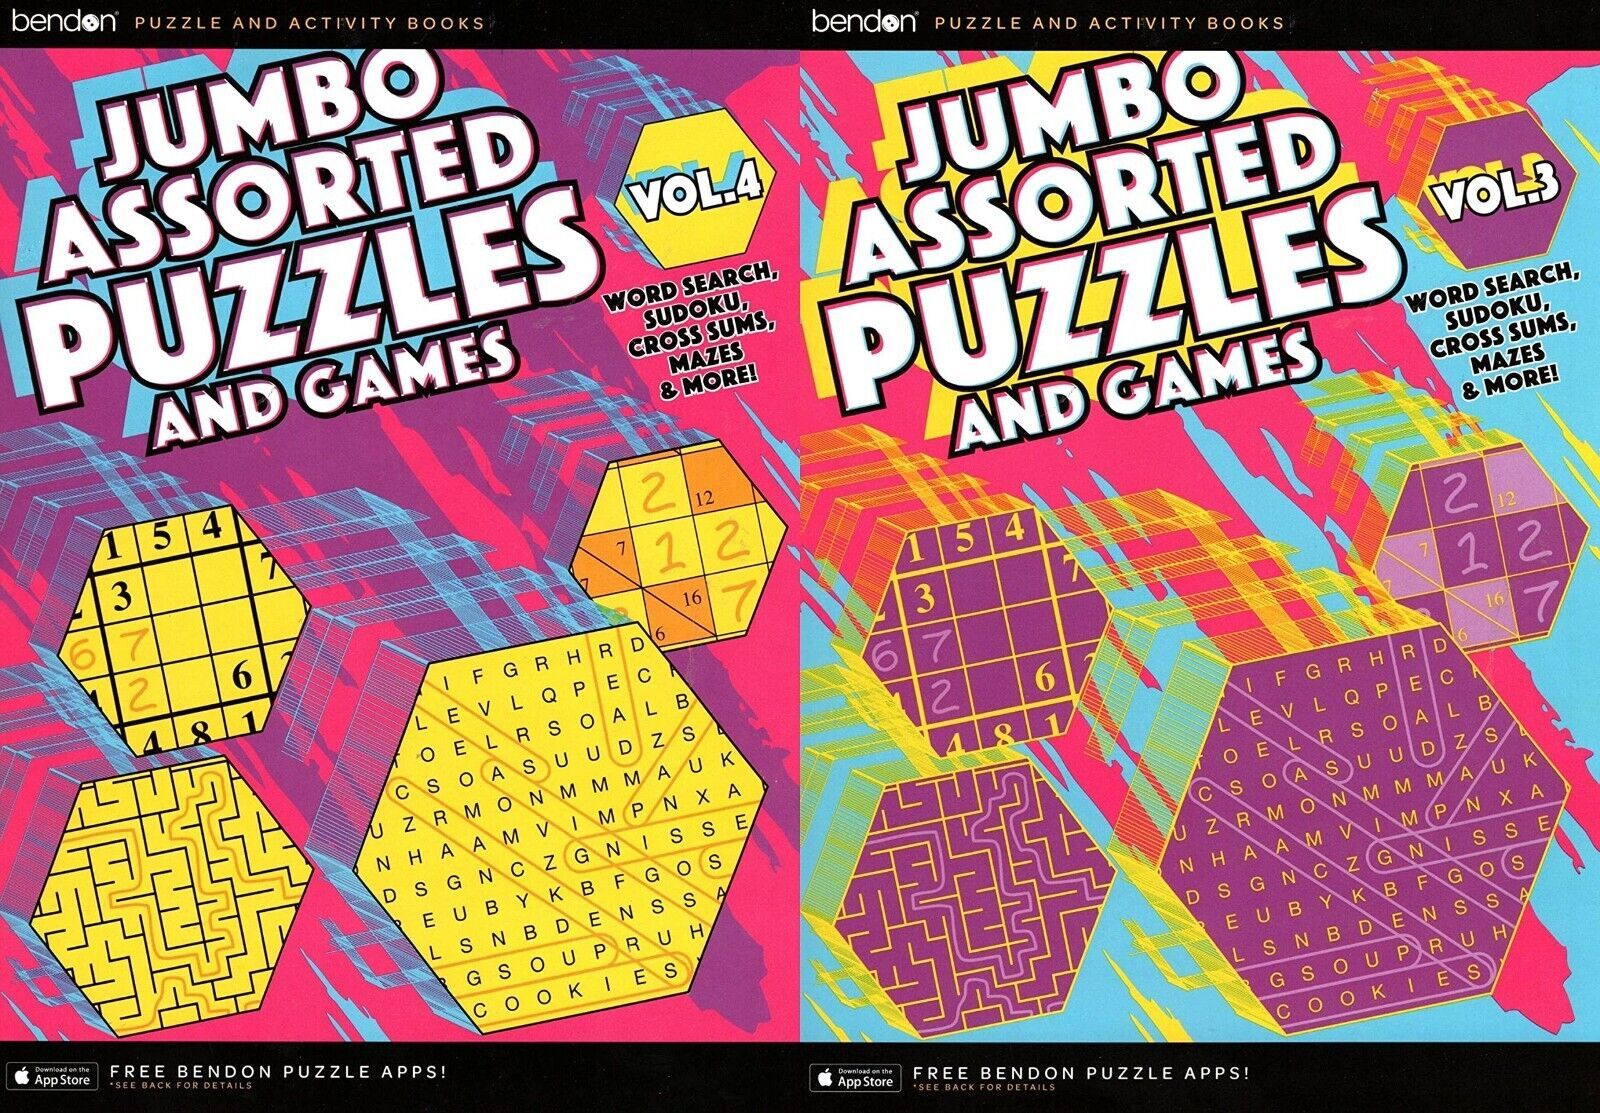 Large Print Jumbo Assorted Puzzles and Games - Word Search Sudoku. vol.3-4 - $10.84